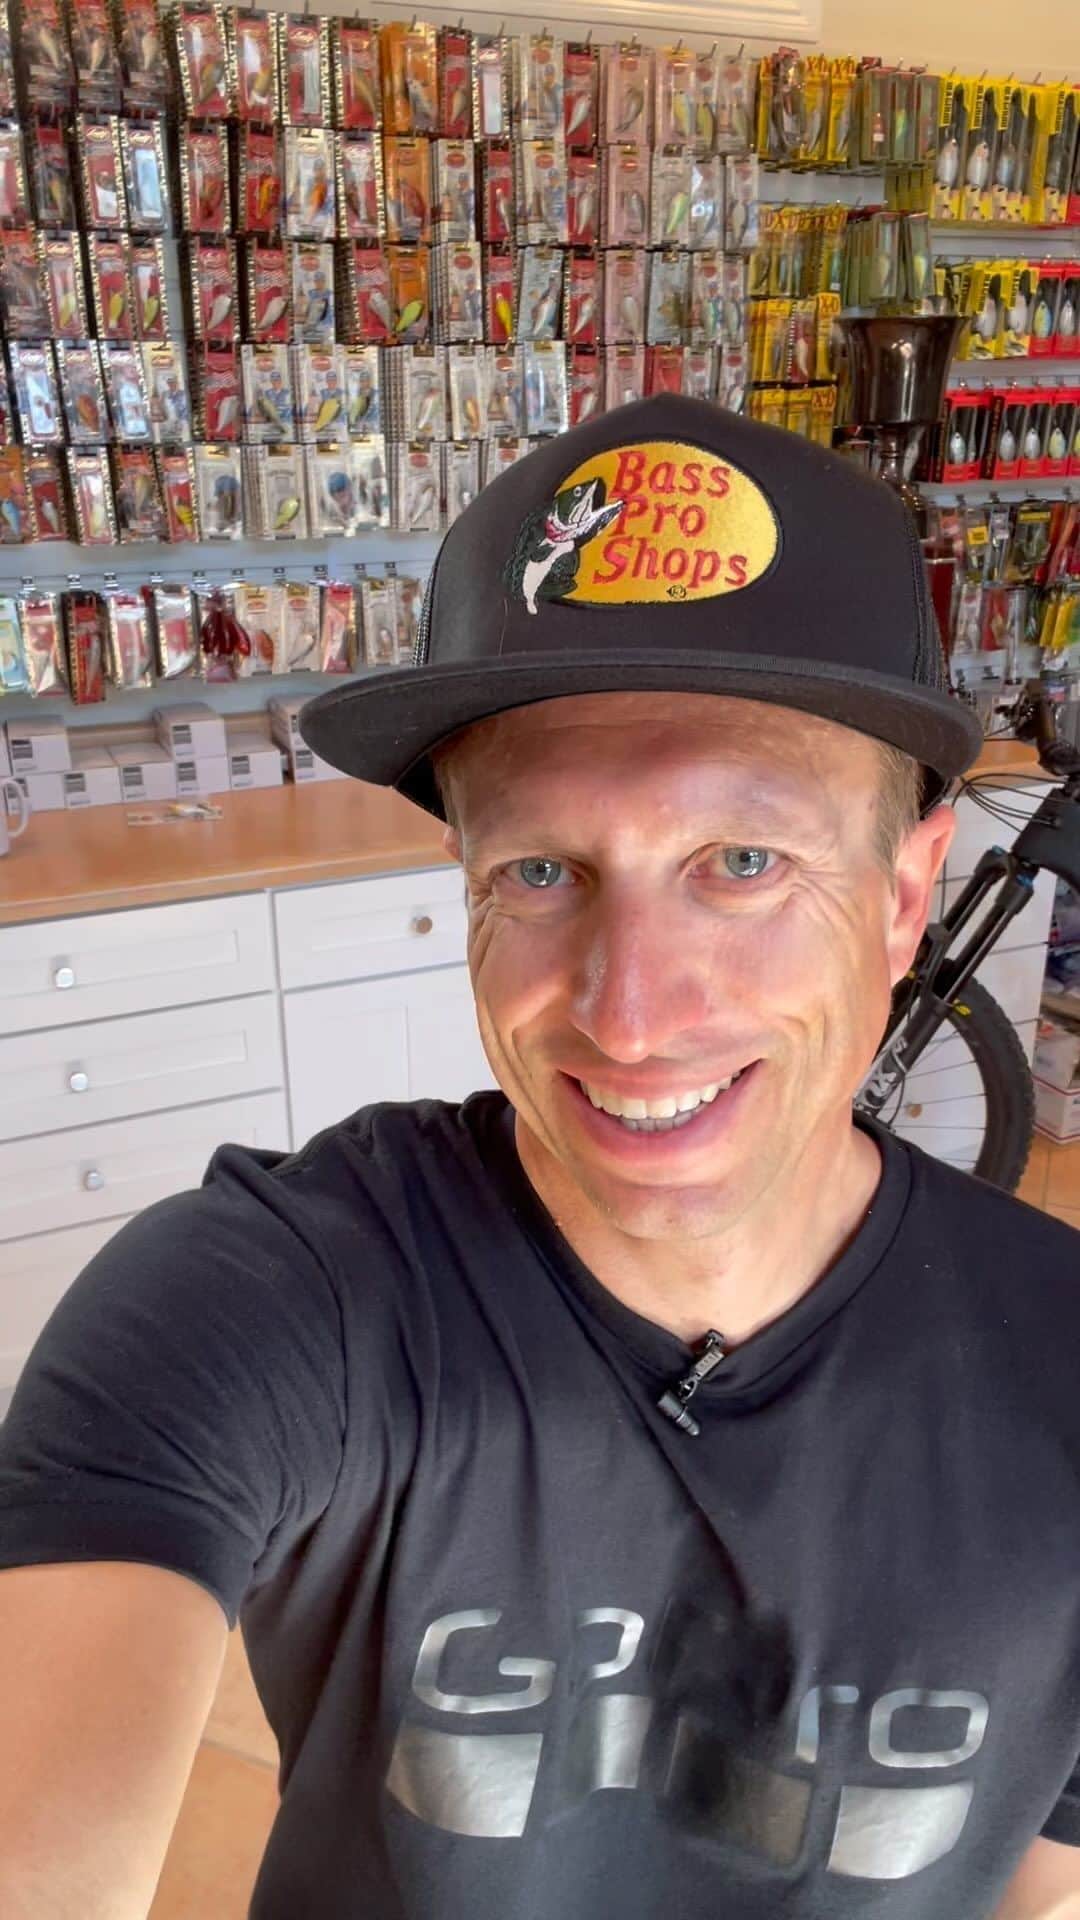 Brent Ehrlerのインスタグラム：「Between The Scales with @bassproshops Fun behind the scenes shoot. We’ll dive into my life at home, diet, exercise, ice plunge, coffee, shooting, mountain biking, basketball with my son etc. just the usual 😂. All leading up to my next event at Guntersville.」